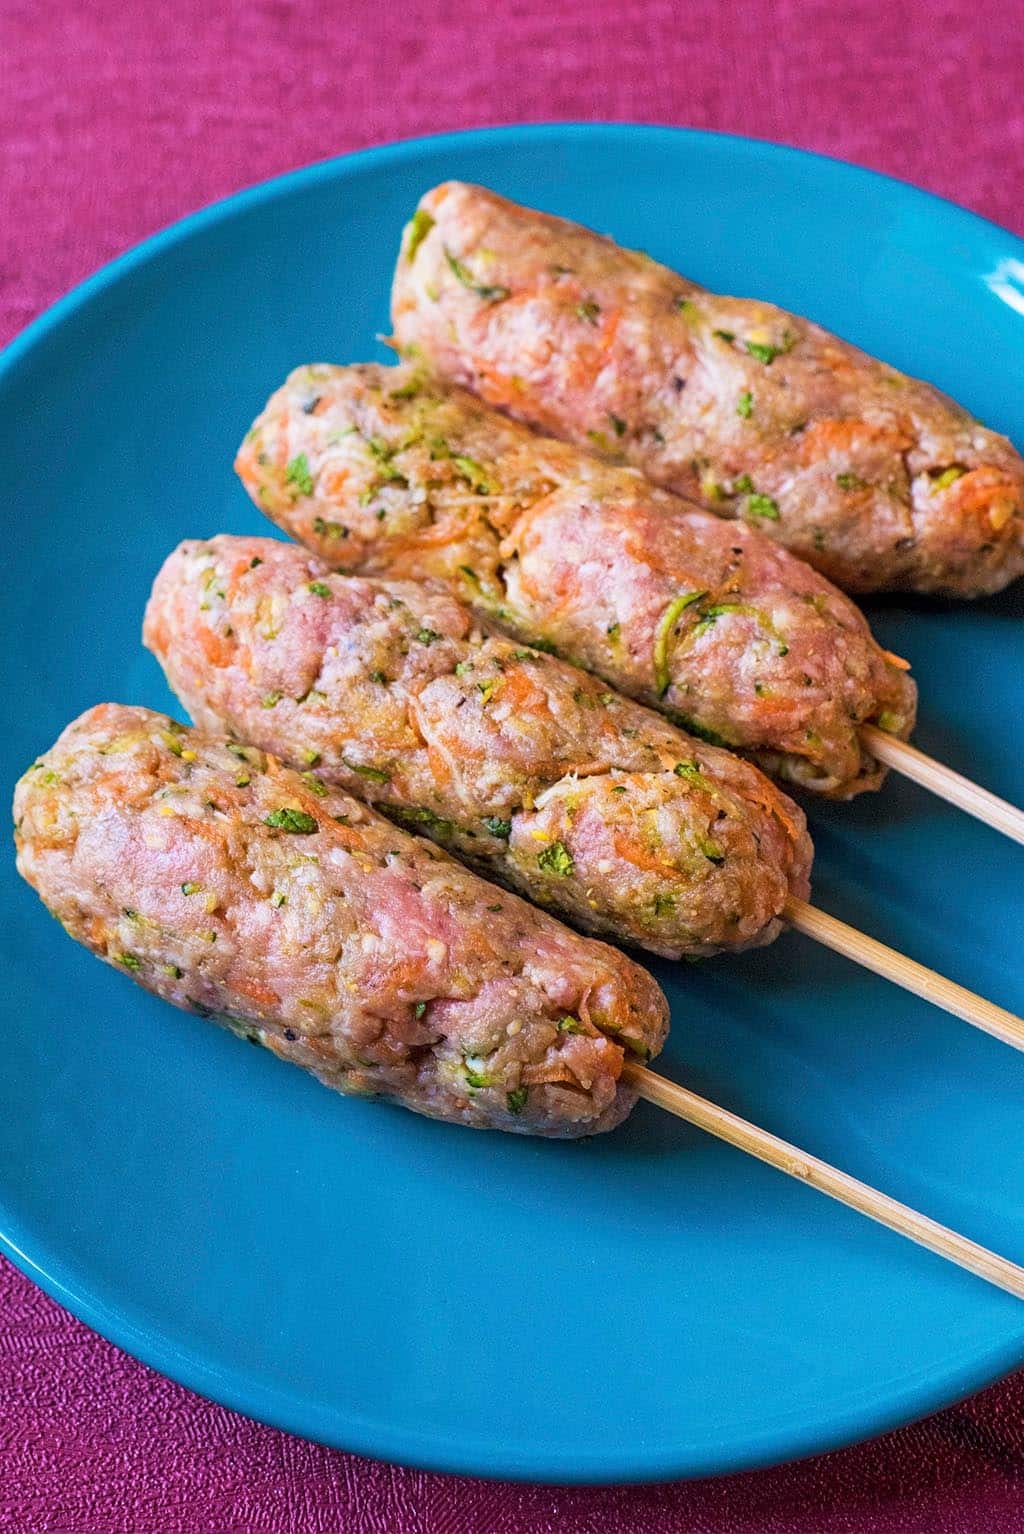 Four uncooked lamb koftas on a blue plate.